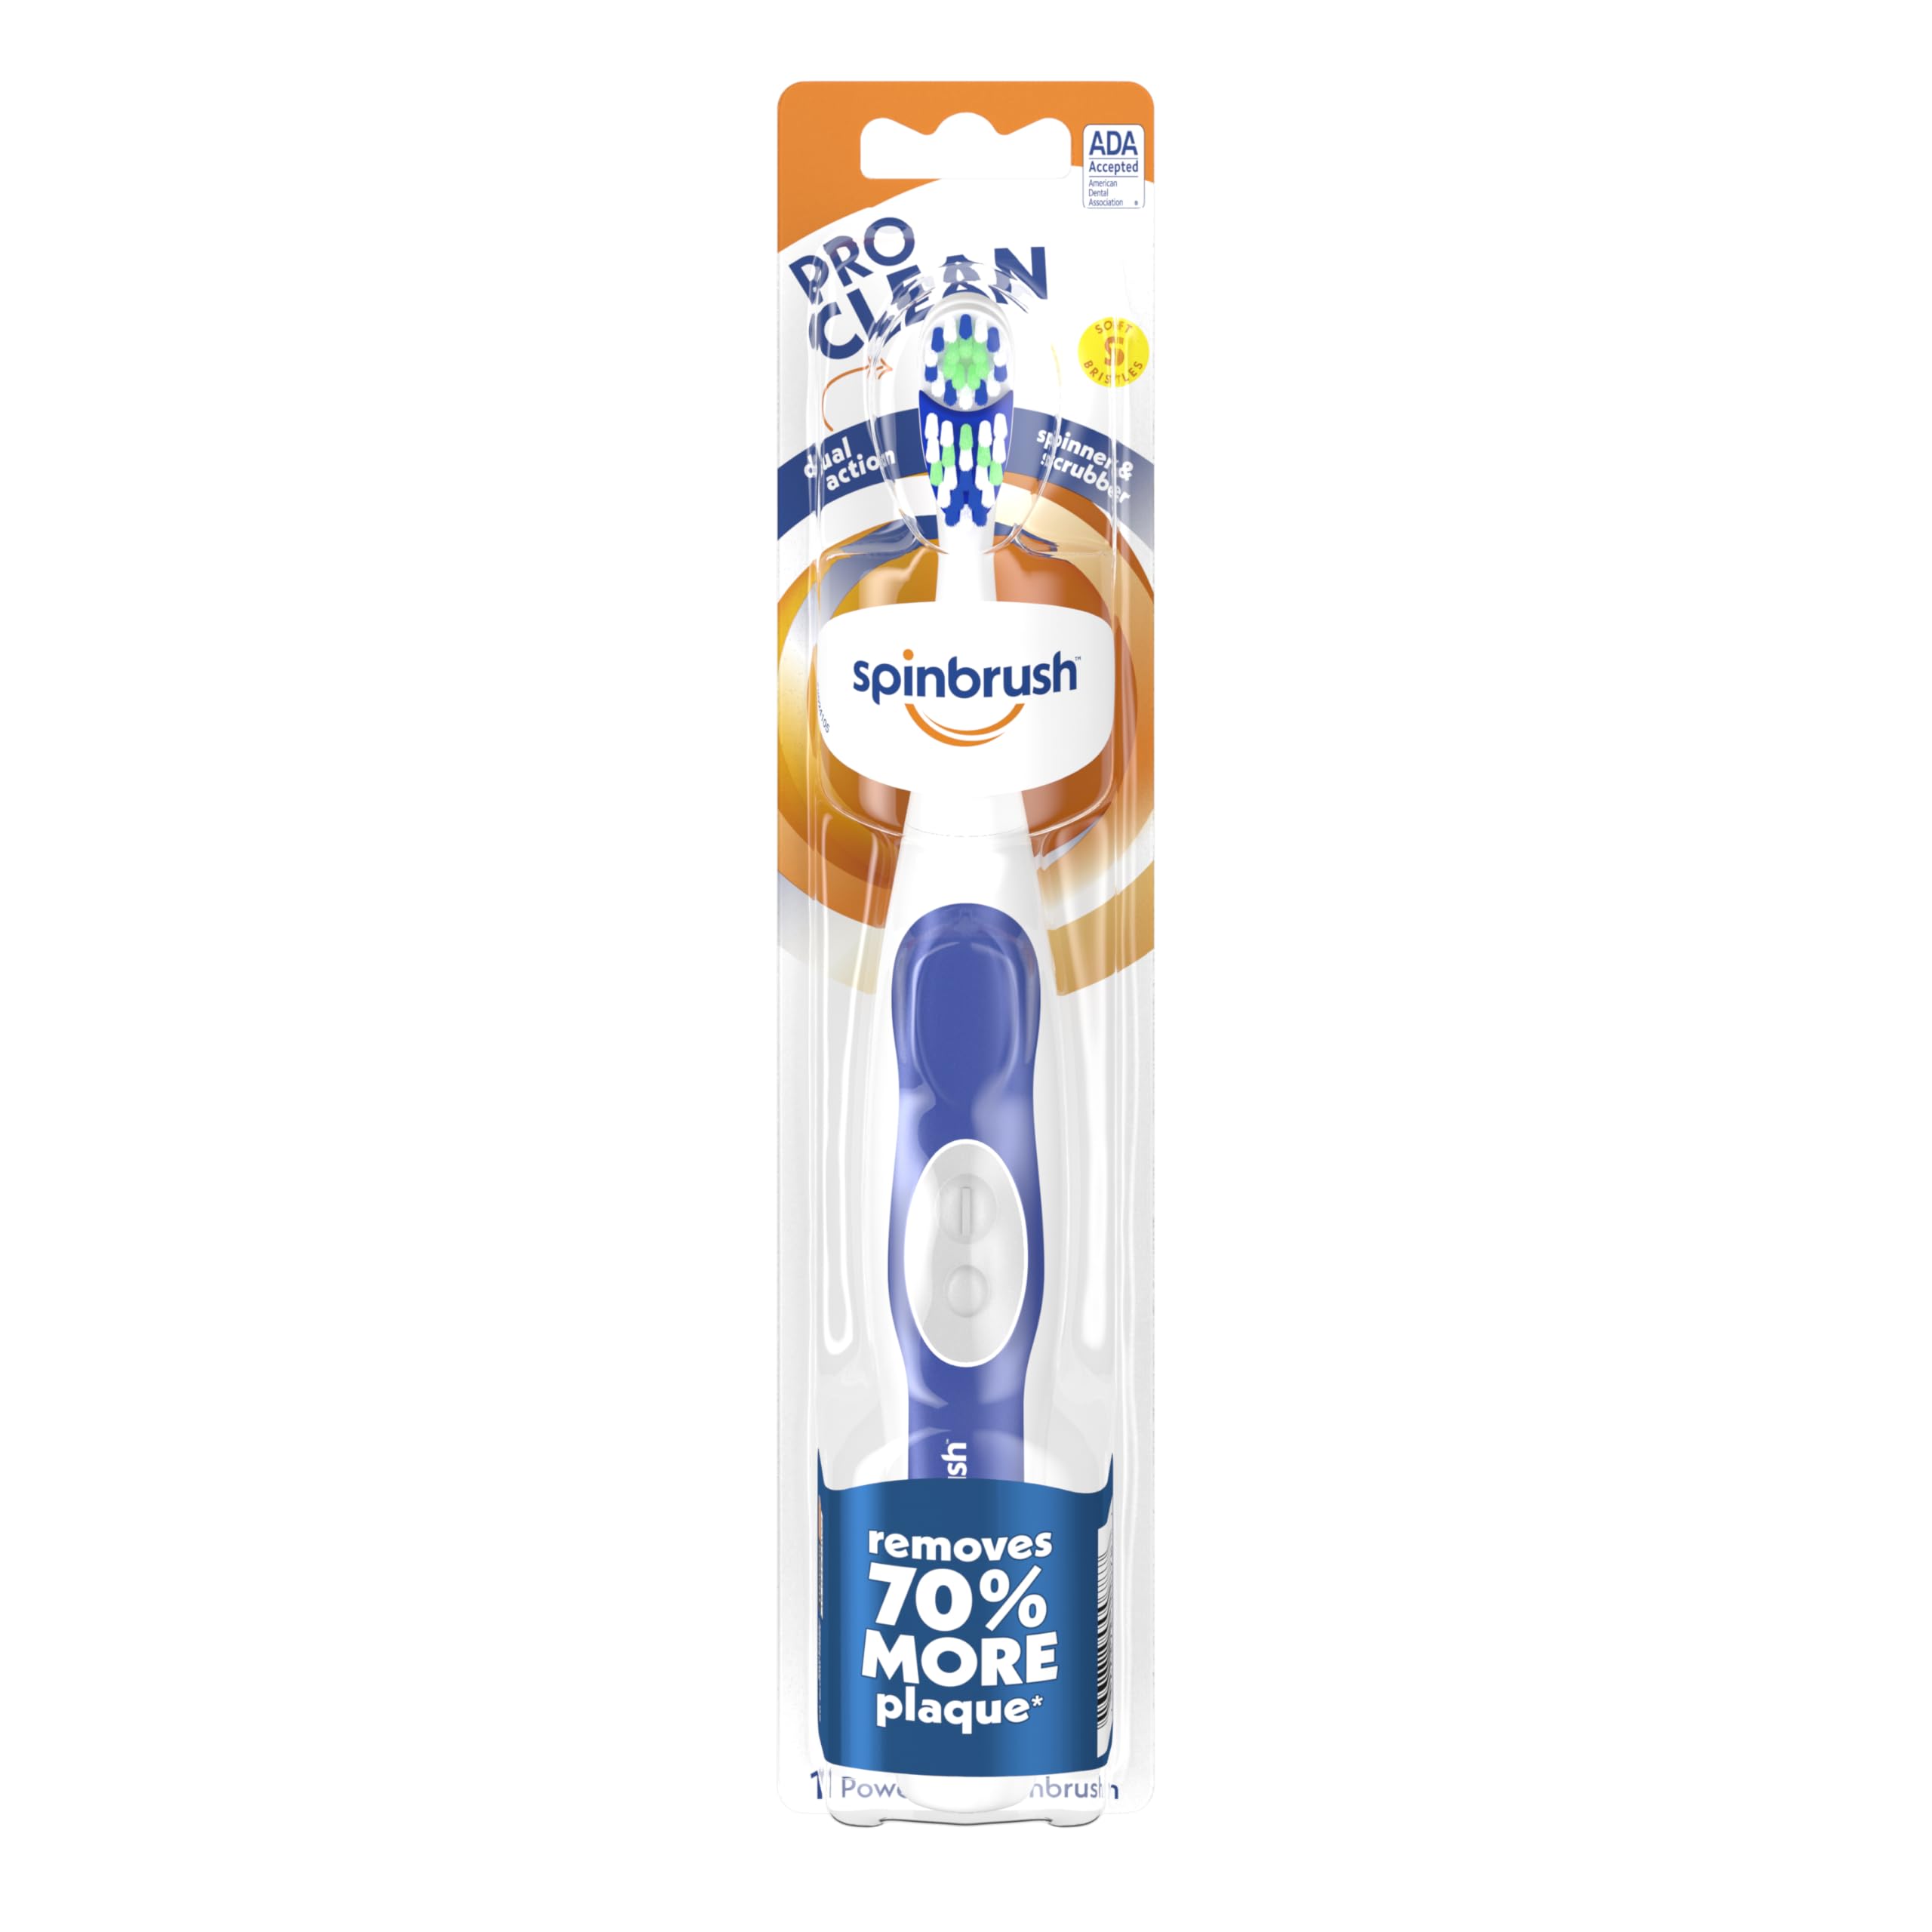 Spinbrush PRO CLEAN Battery Powered Toothbrush, Soft Bristles, 1 Count, Gold or Blue Color May Vary - $3.82 w/15% S&S at Amazon